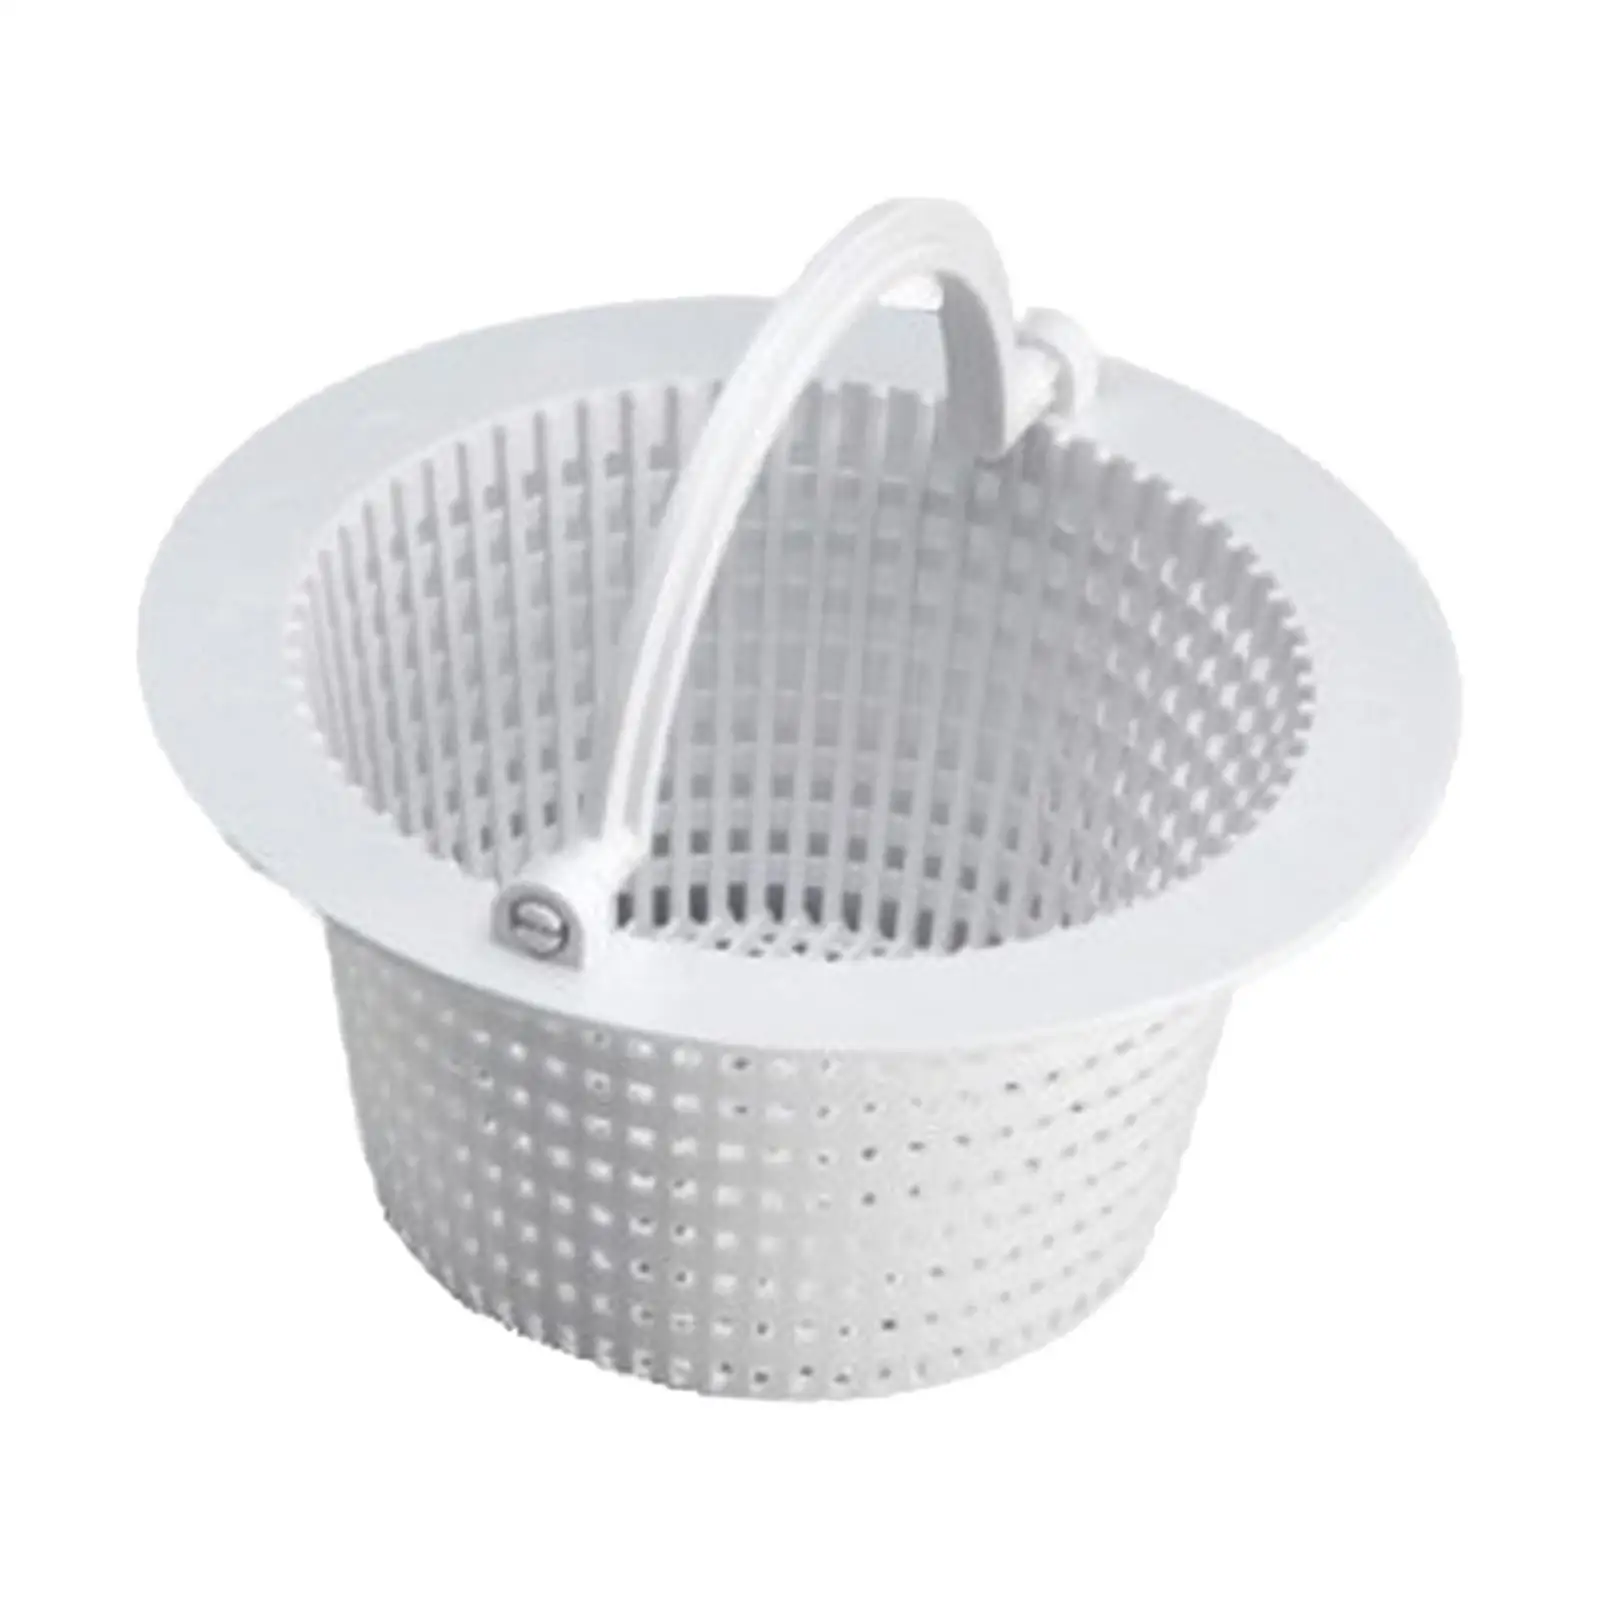 Pool Strainer Basket Accessories Supplies, with Handle Pool Skimmer Basket Pool Filter Basket  Cleaning Leaves in Ground Pool